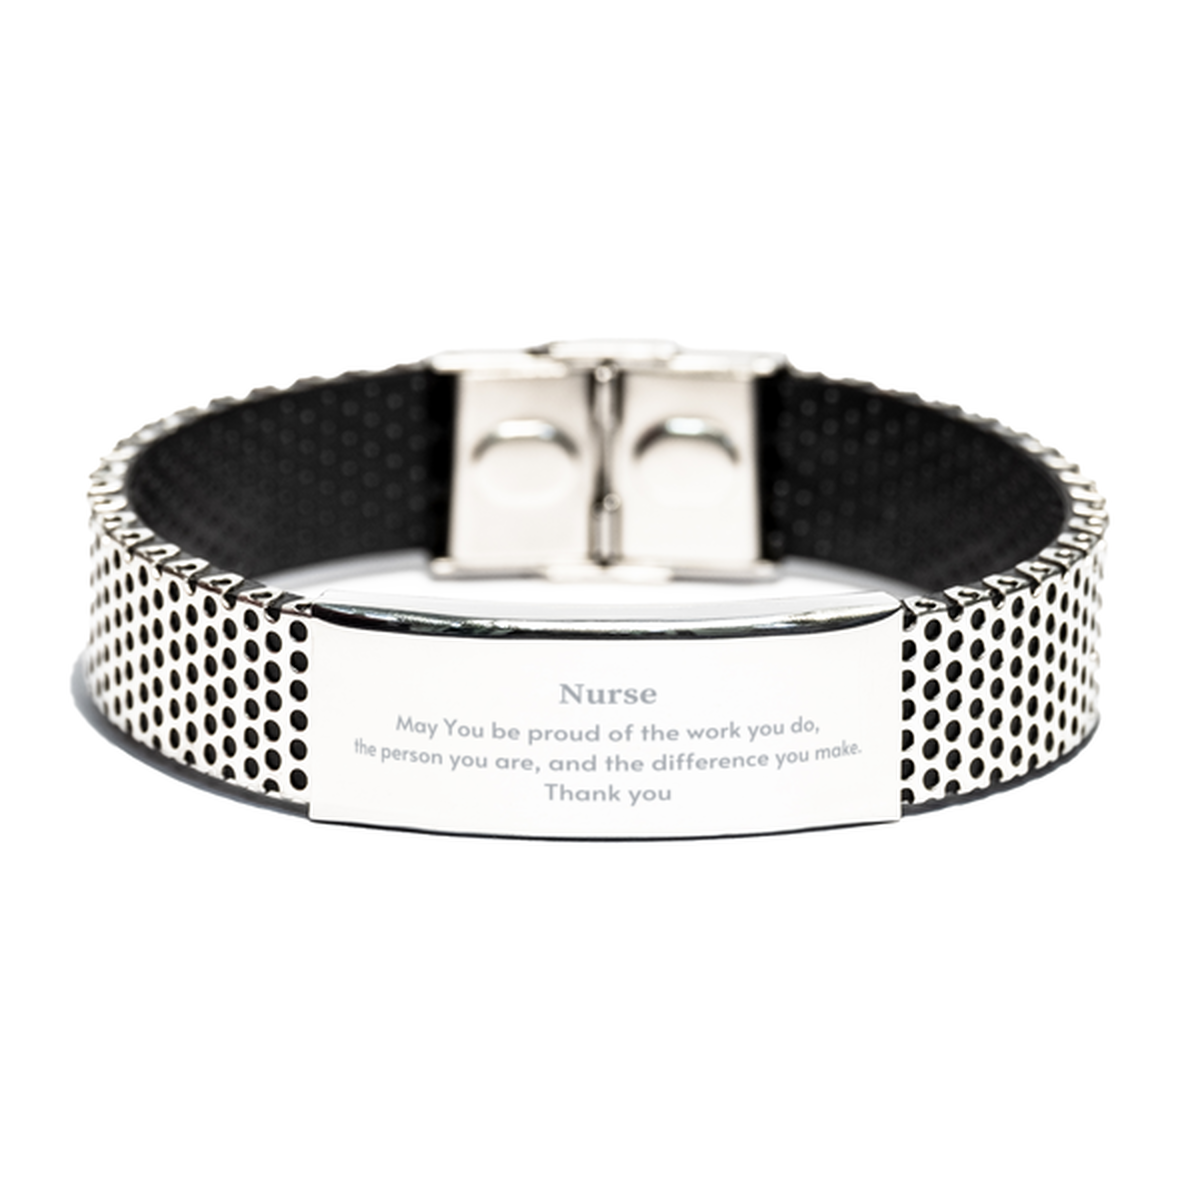 Heartwarming Stainless Steel Bracelet Retirement Coworkers Gifts for Nurse, Nurse May You be proud of the work you do, the person you are Gifts for Boss Men Women Friends